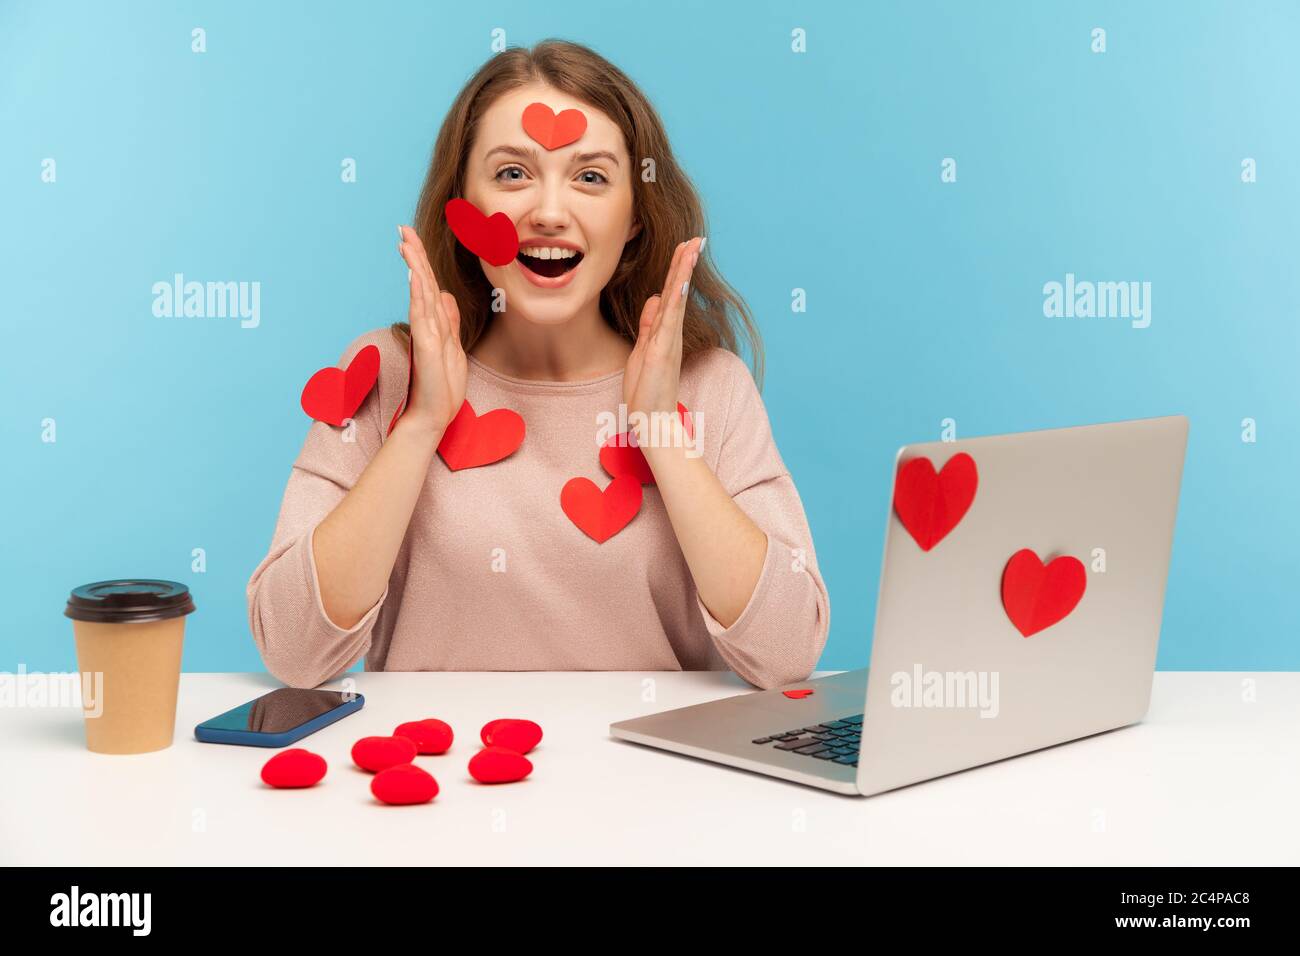 Amazed joyful young woman sitting all covered with sticker love hearts, looking at camera with surprised expression, full of valentine's day greetings Stock Photo